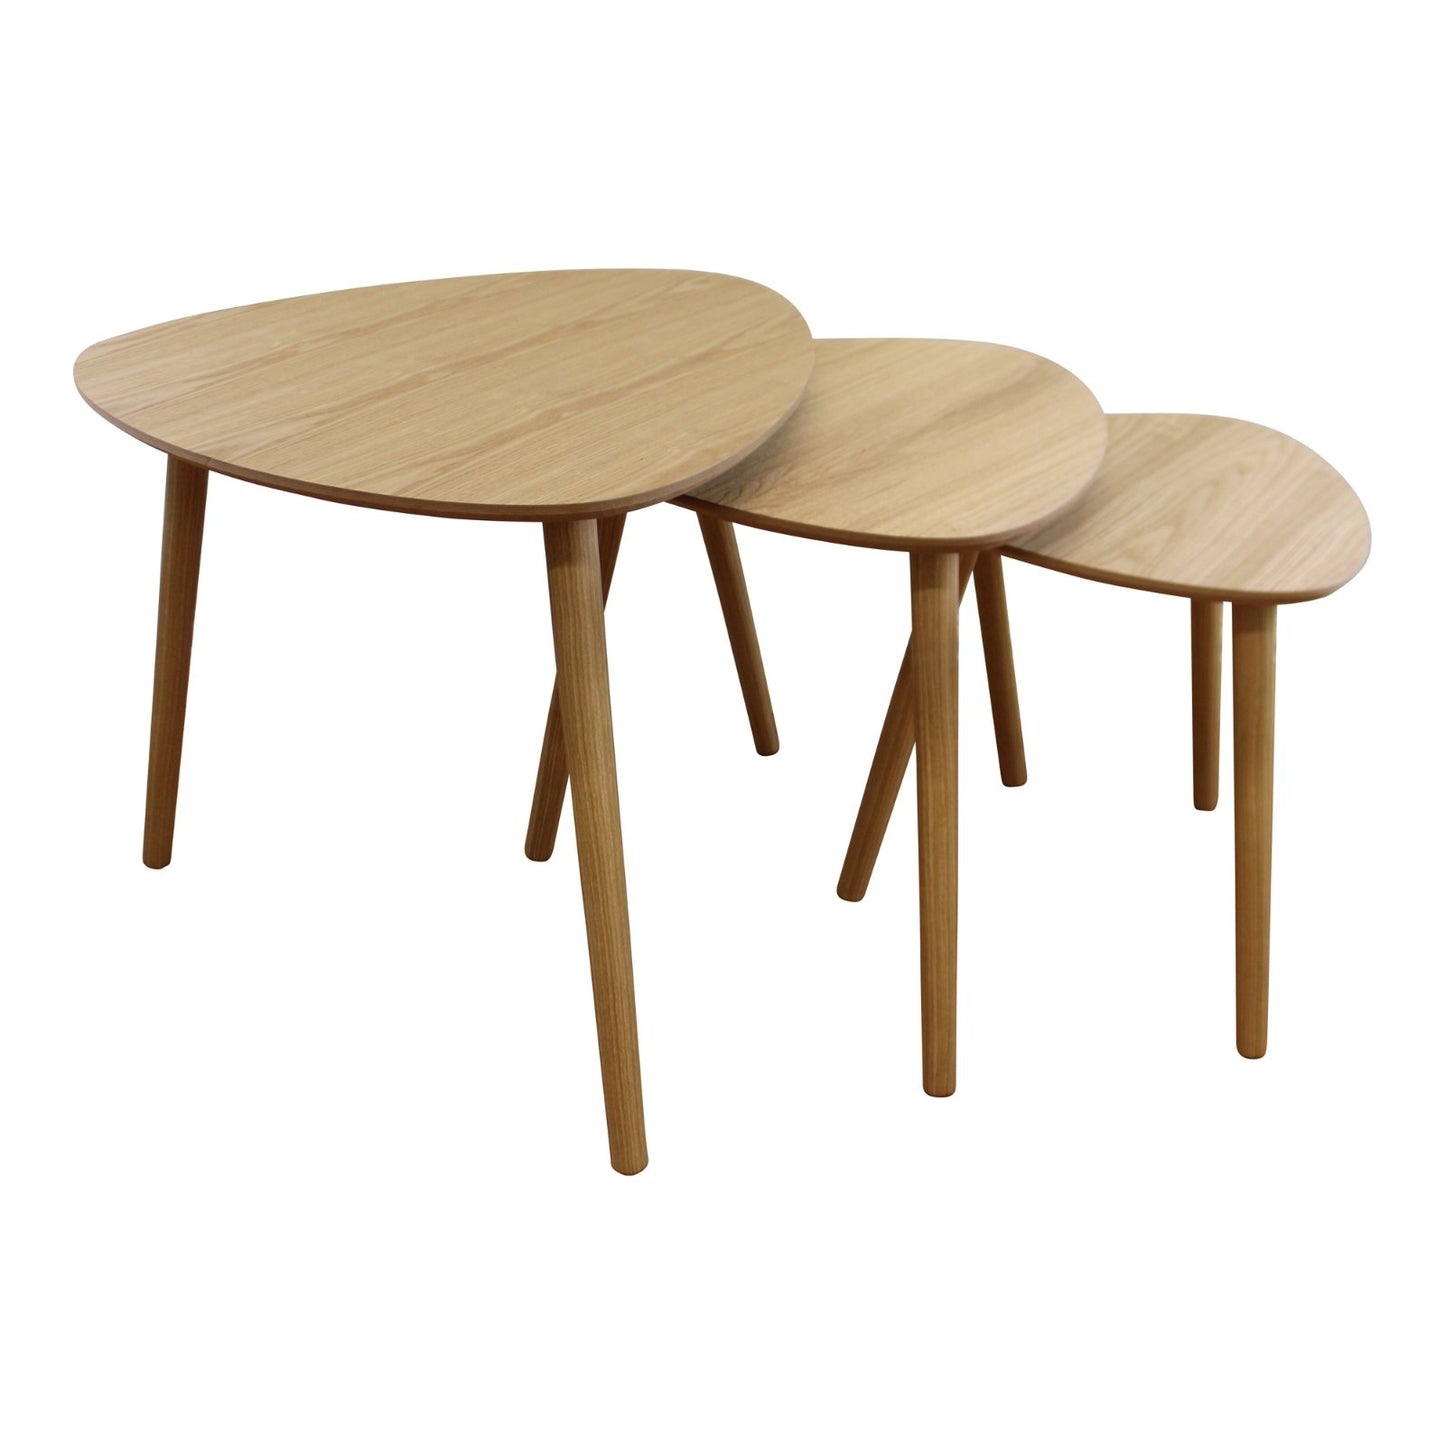 Set of 3 Oval Nest Of Tables, Wooden Finish